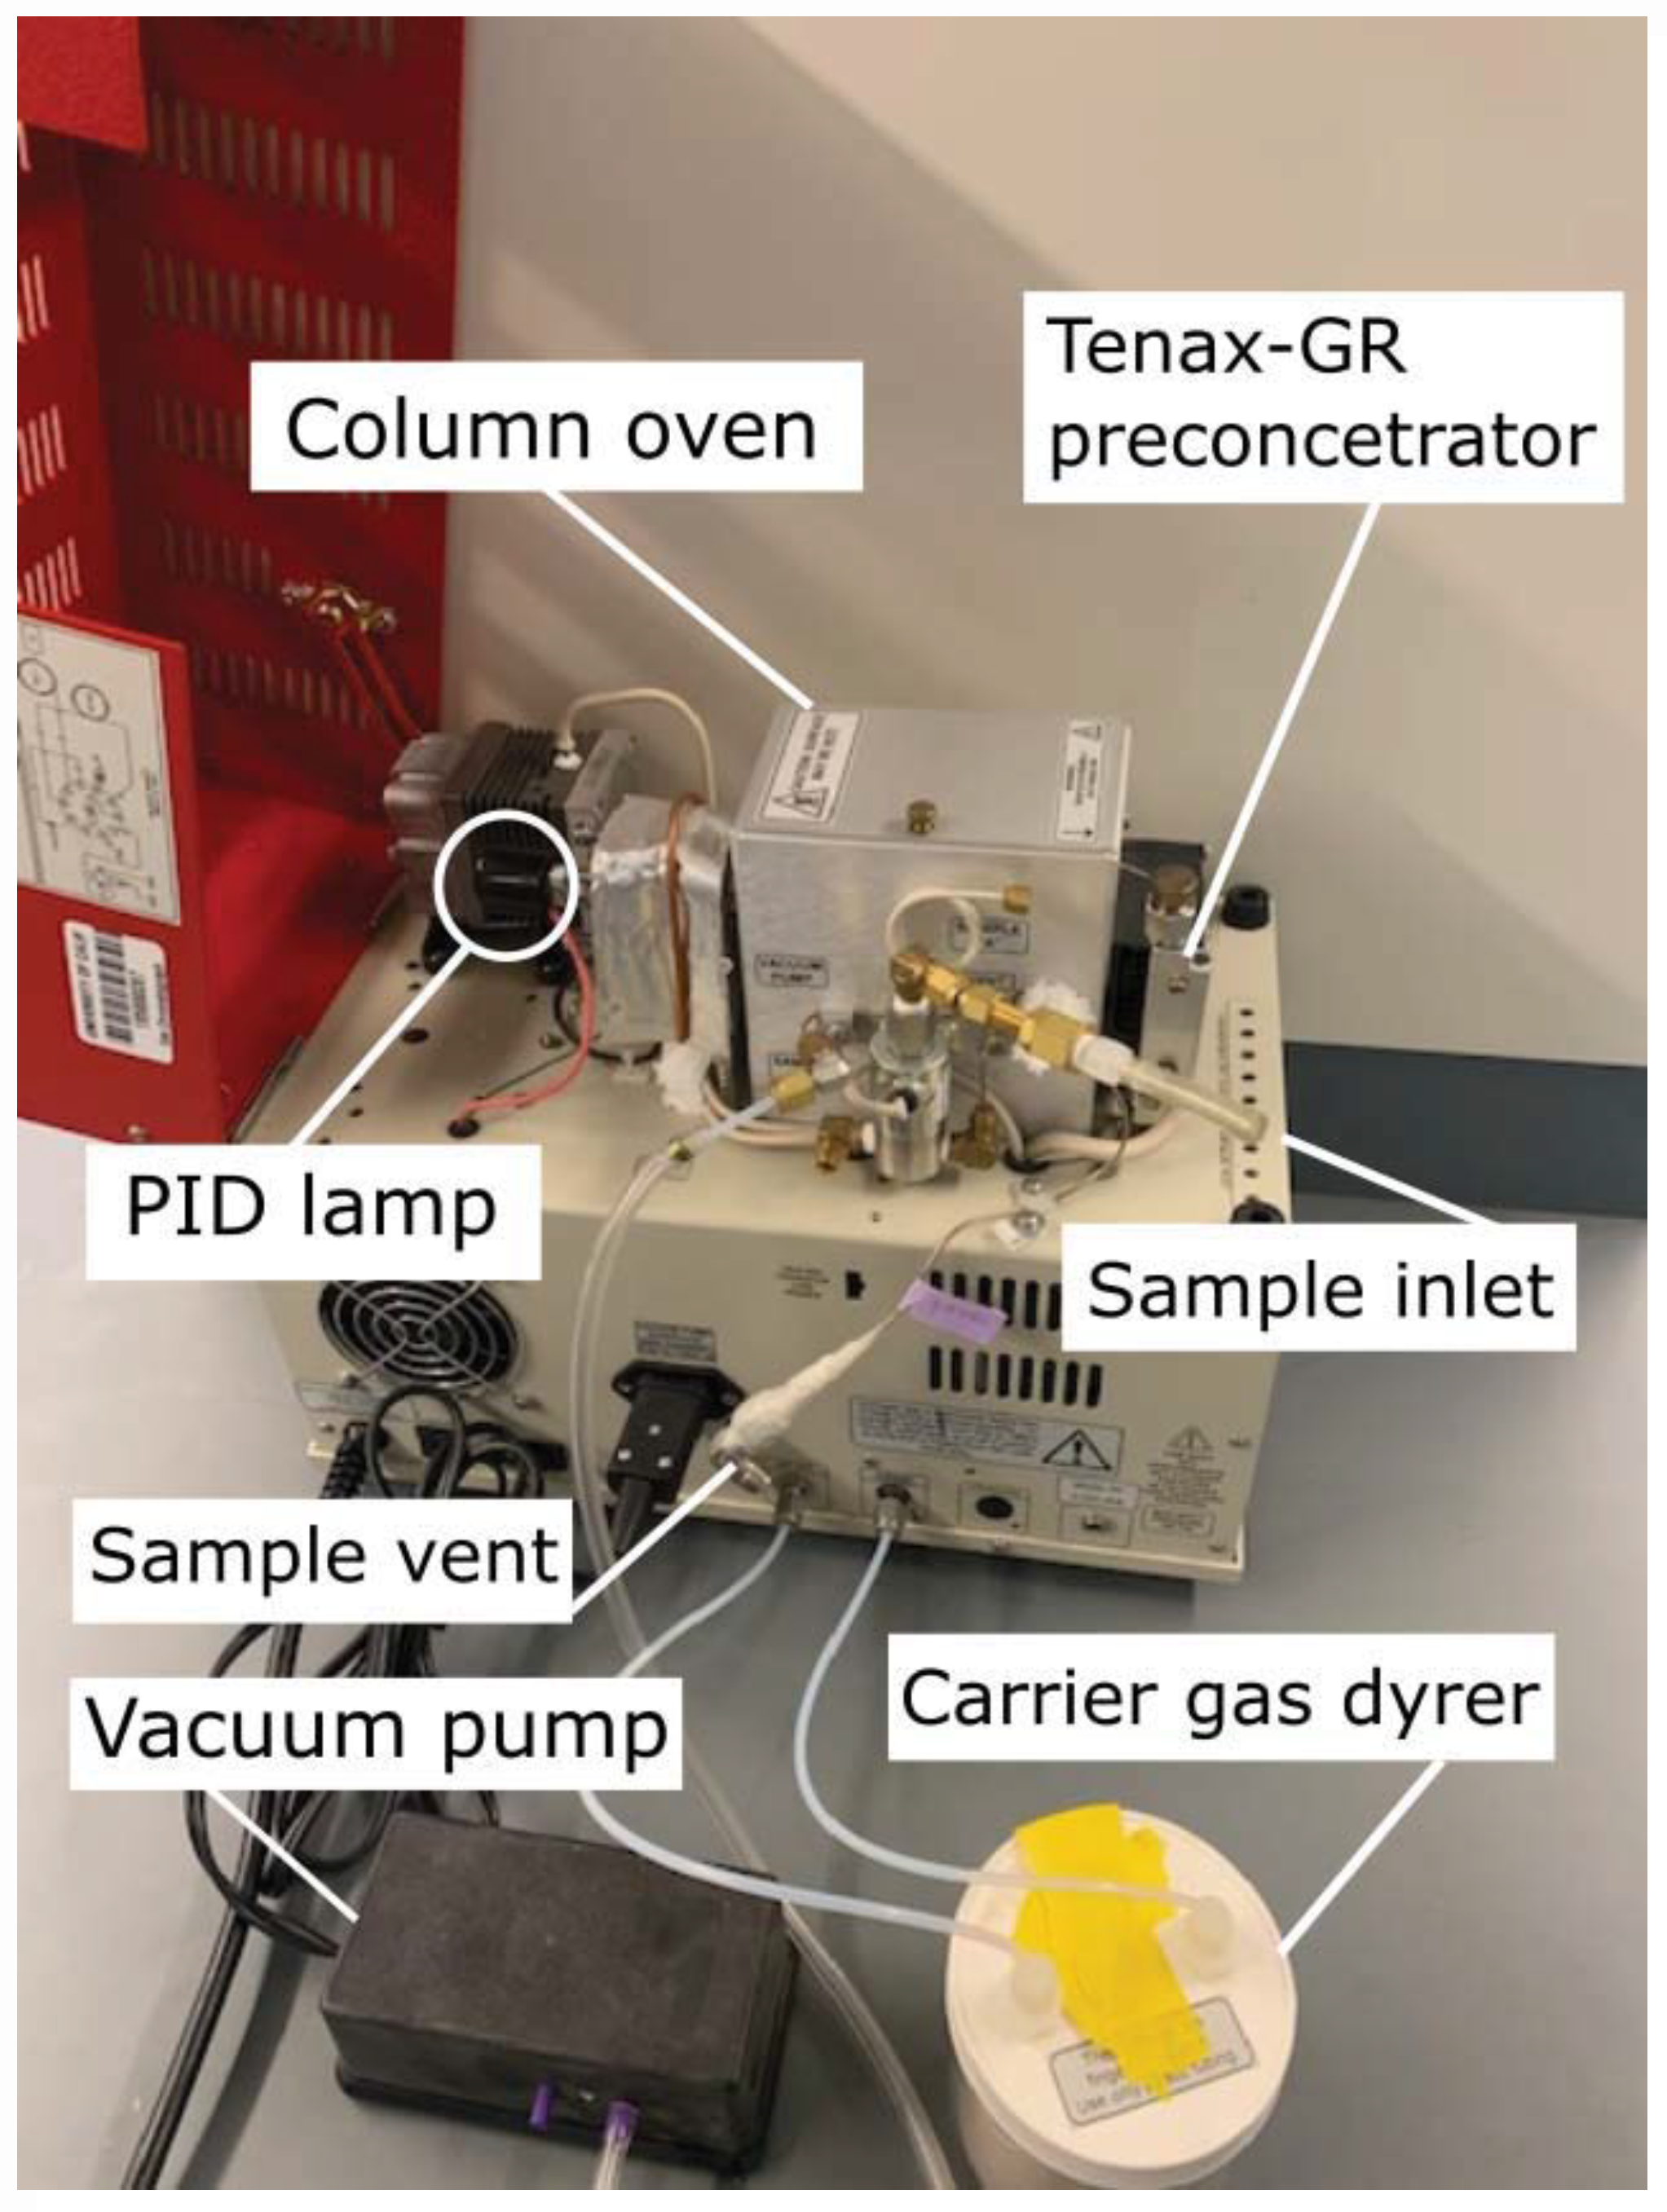 Tracking the changes in parameters during an oven exposure test: a